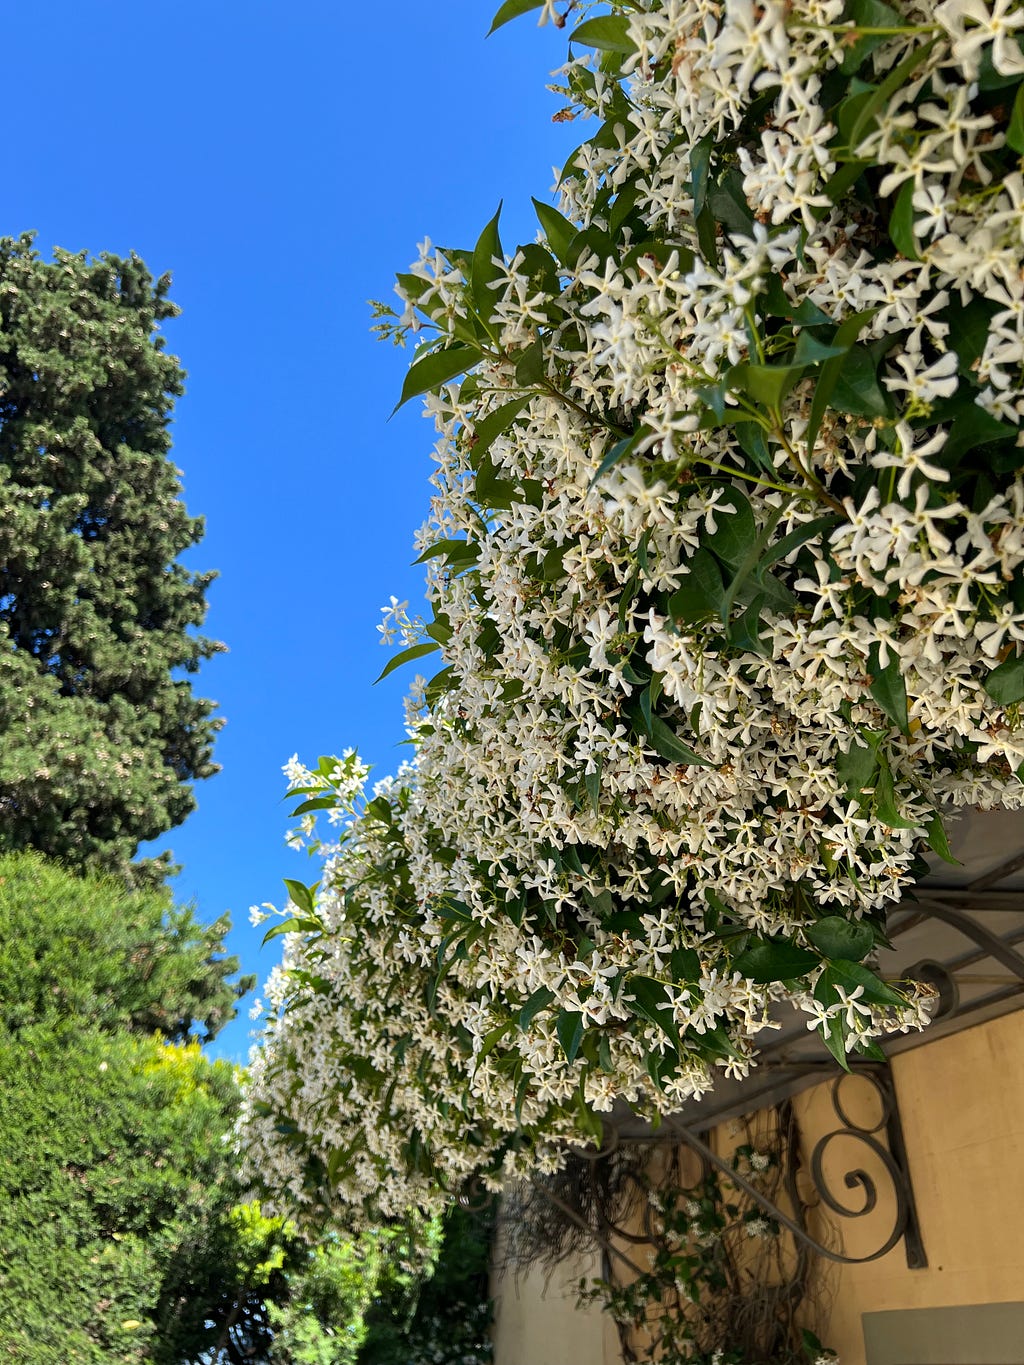 Jasmine, in full bloom with thousands of tiny white and fragrant blossoms.